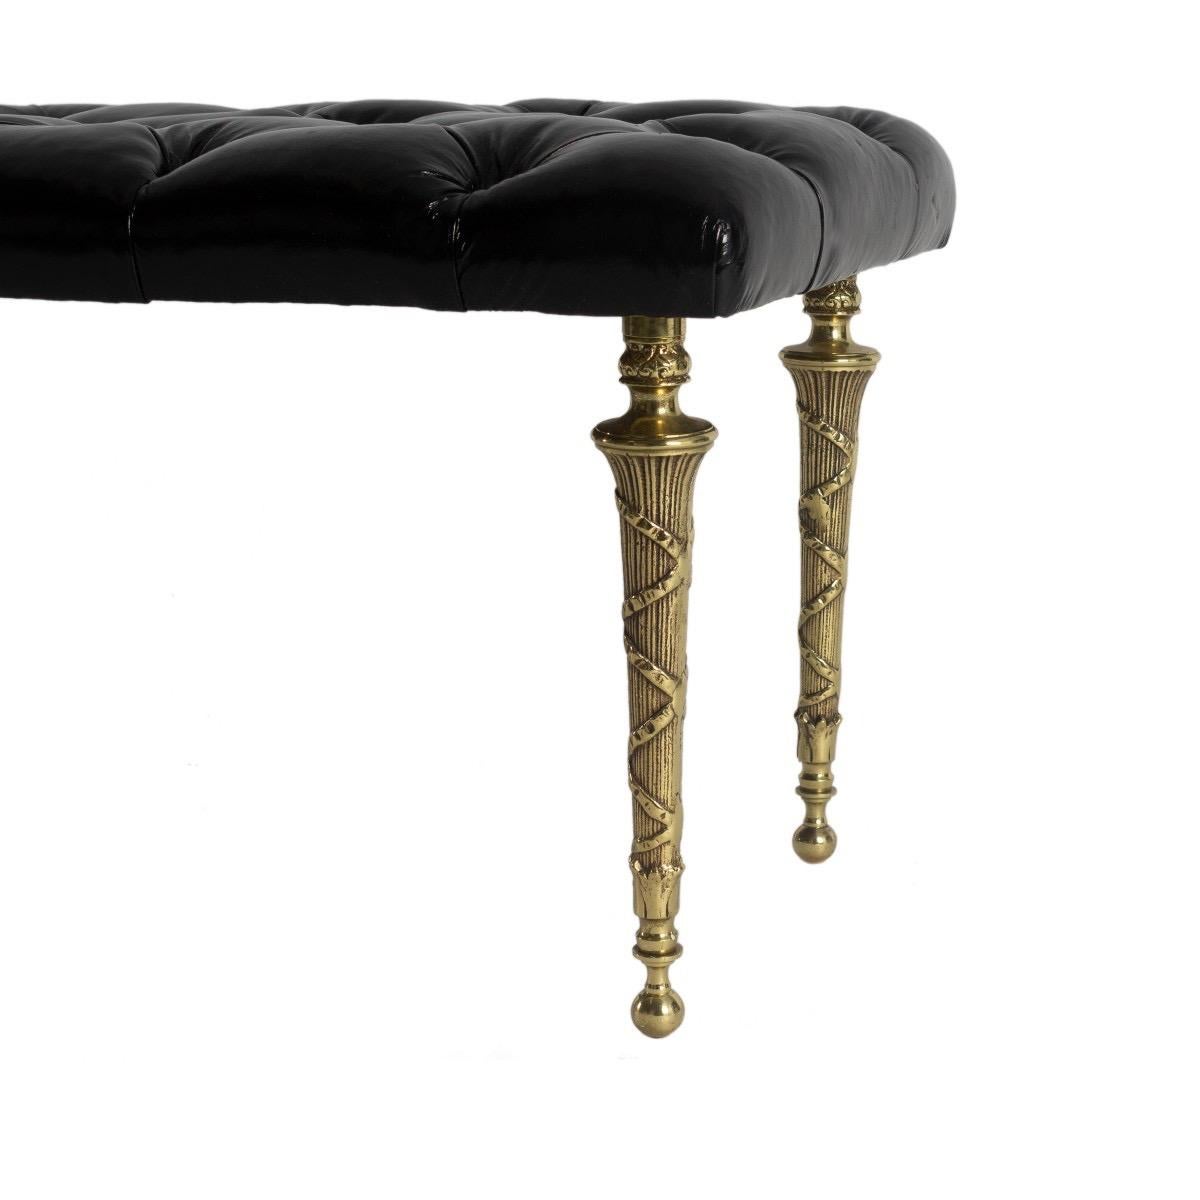 A black patent leather upholstered bench it diamond tufted seat and self-buttons, resting on six dark brass legs with ribbon detailing and ball feet, circa 2010.

Dimensions: 60